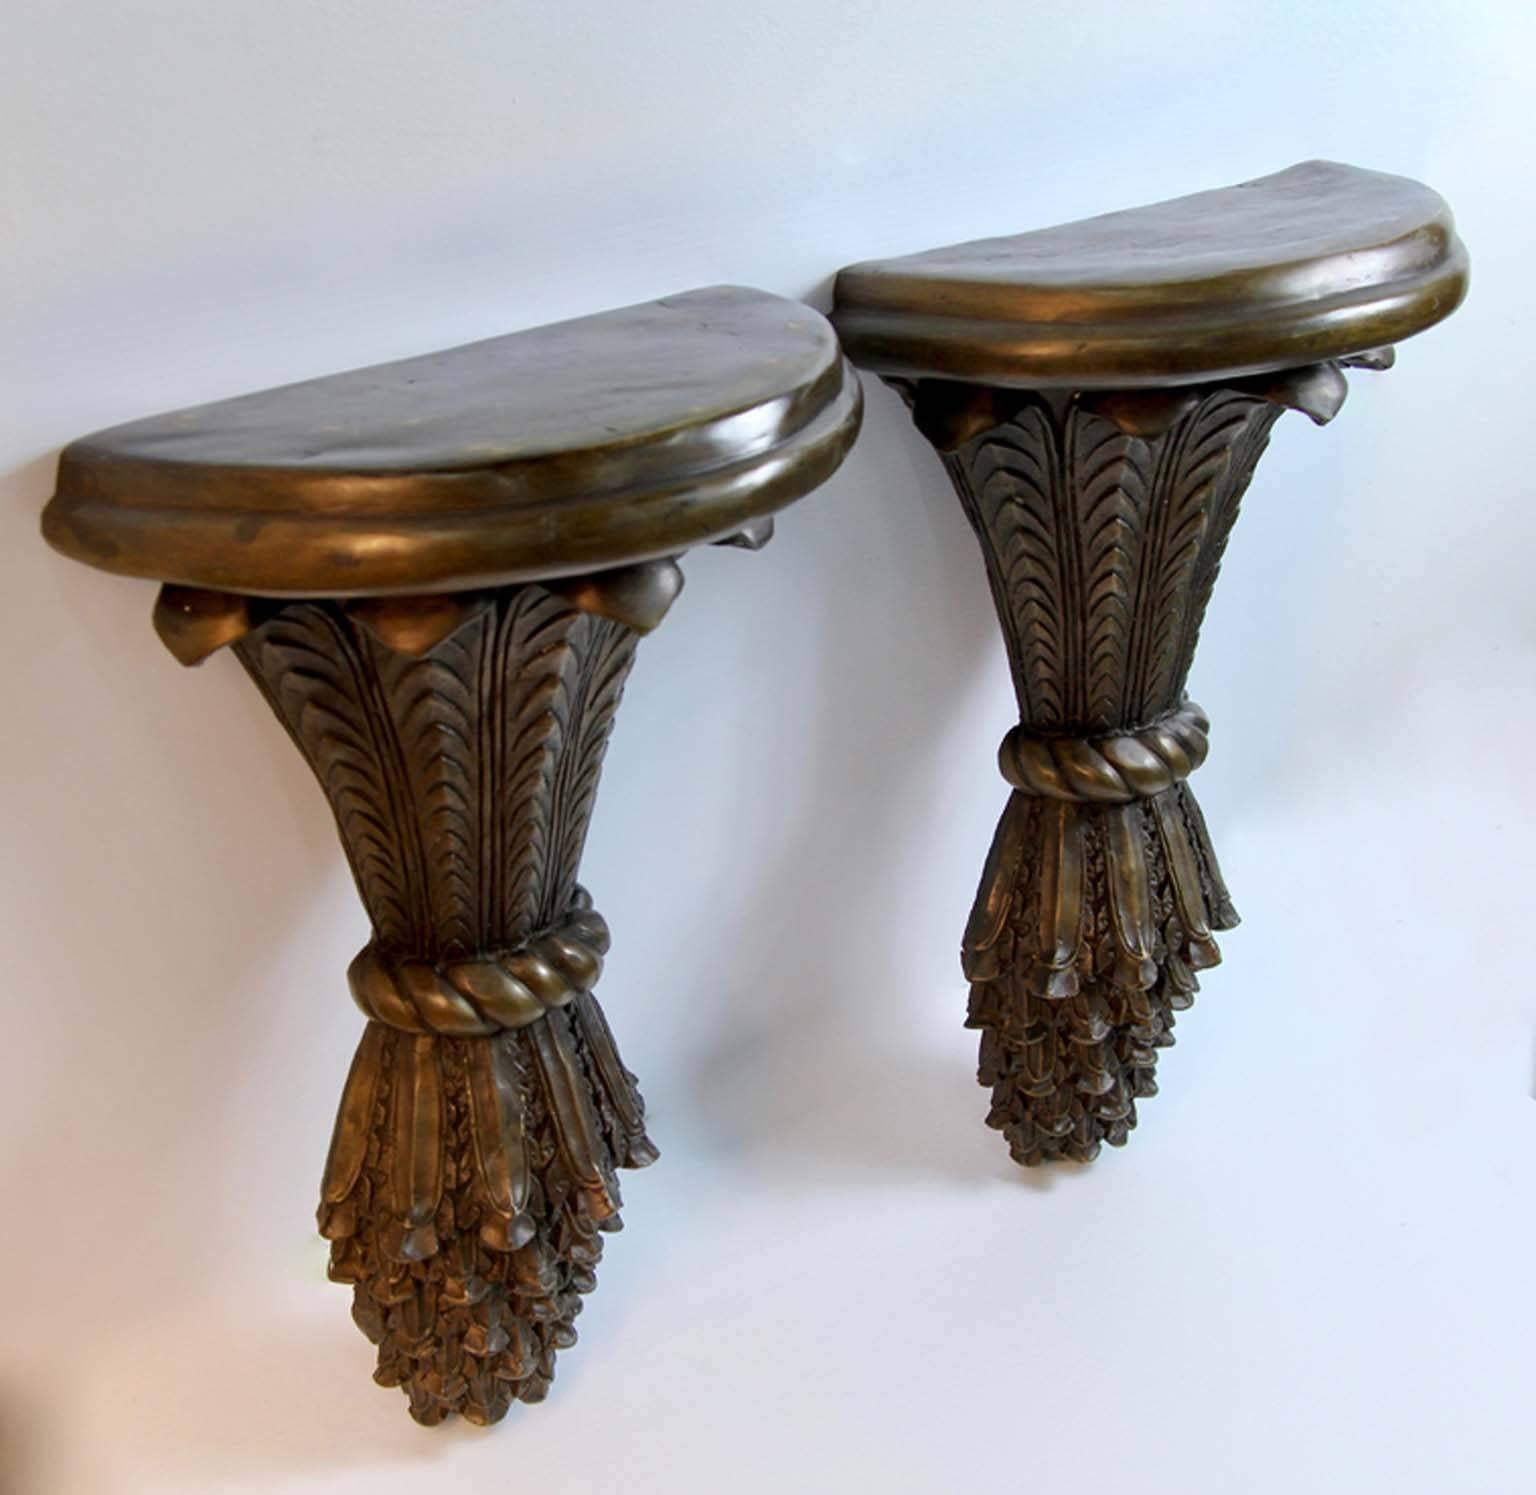 Pair of bronze neoclassical wall shelves. Very heavy.